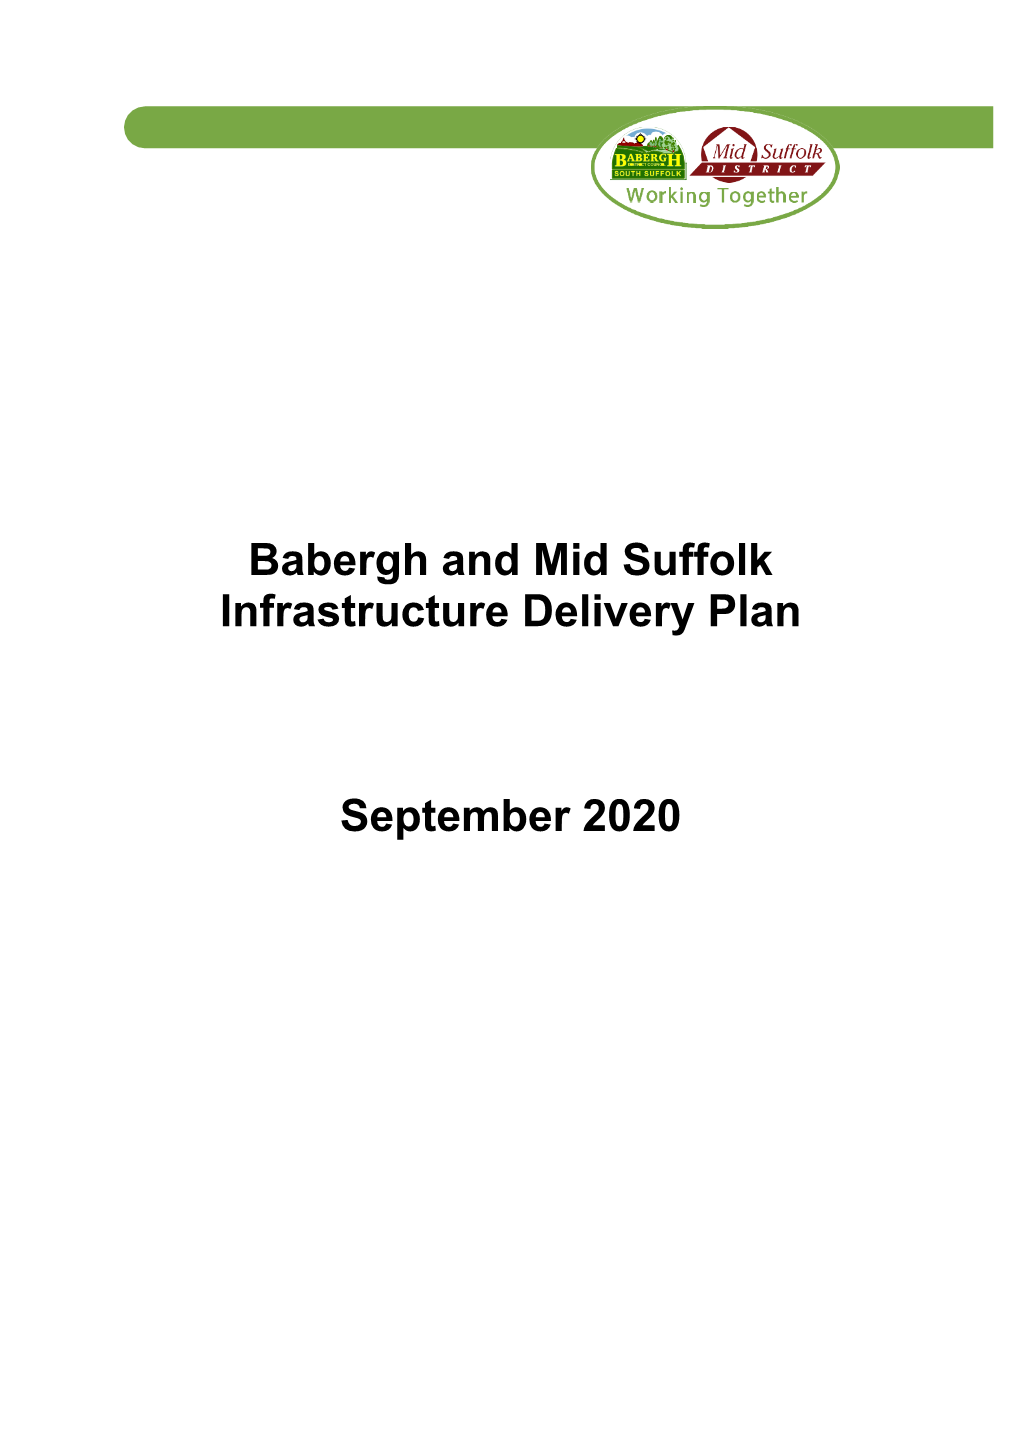 Babergh and Mid Suffolk Infrastructure Delivery Plan